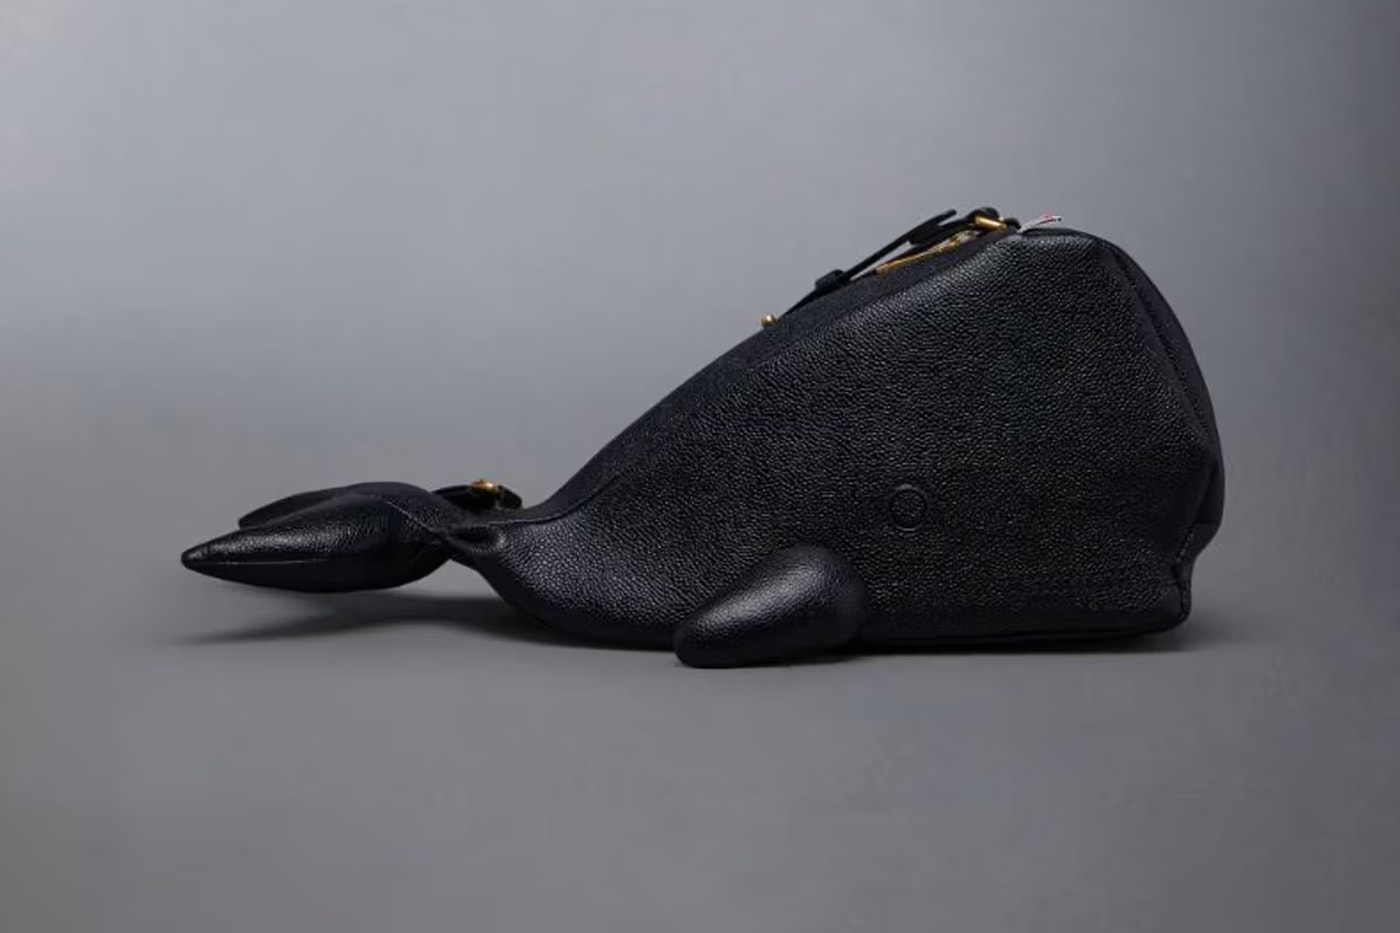 Thom Browne Whale Bag Info and Photos | Hypebeast